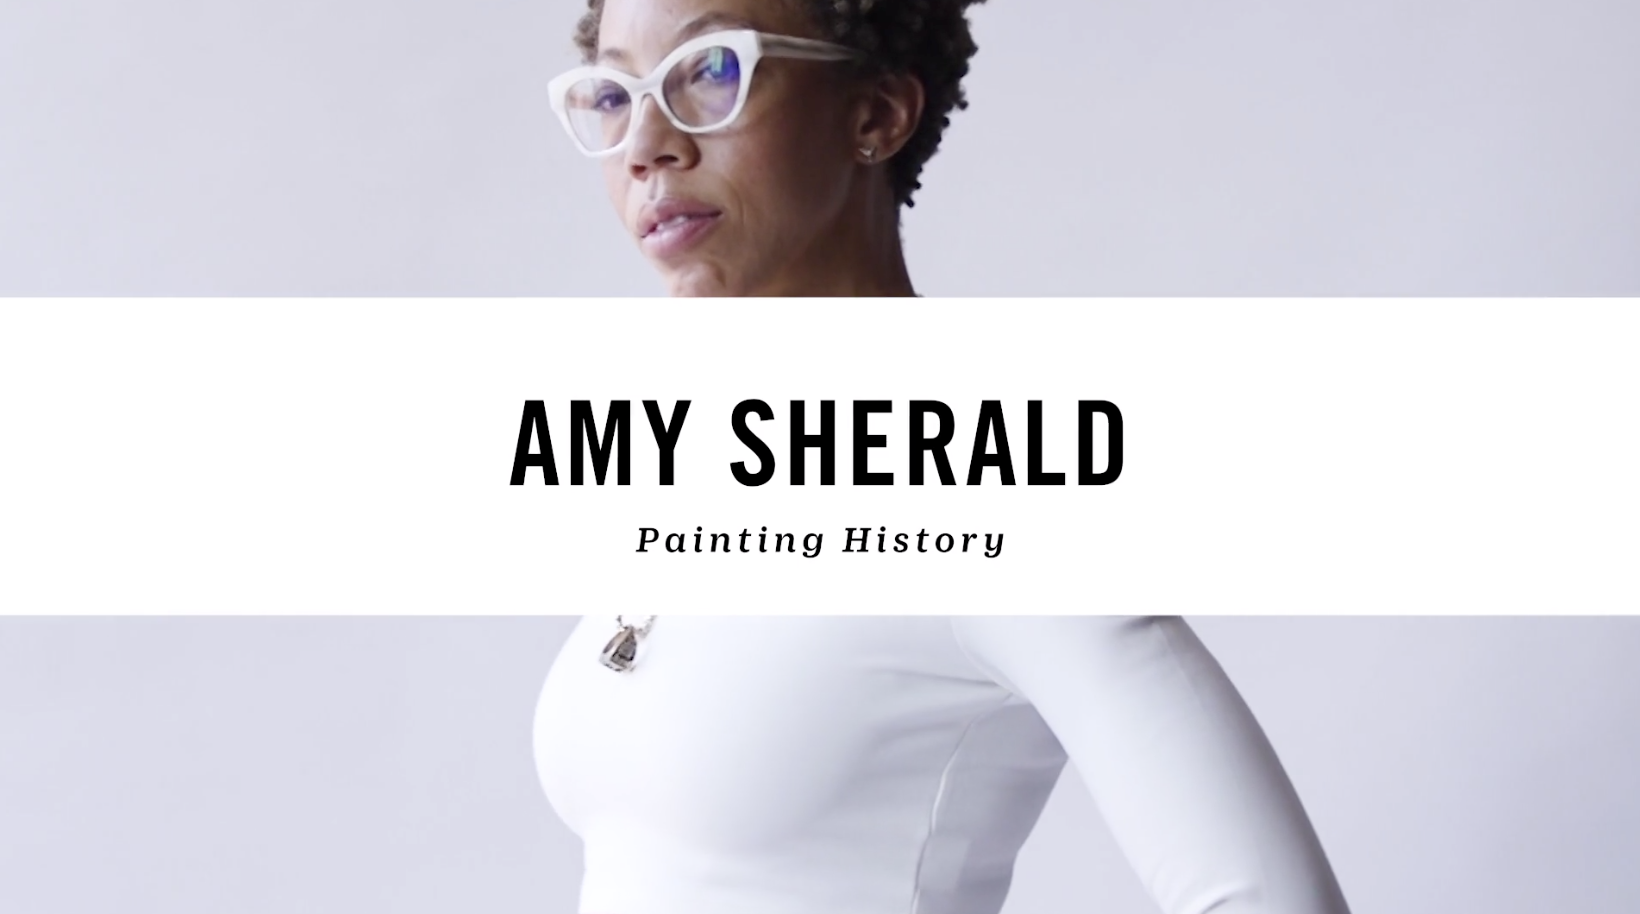 Headshot of Amy Sherald wearing white glasses and white top with a caption overlay that reads, "Amy Sherald, Painting History". 